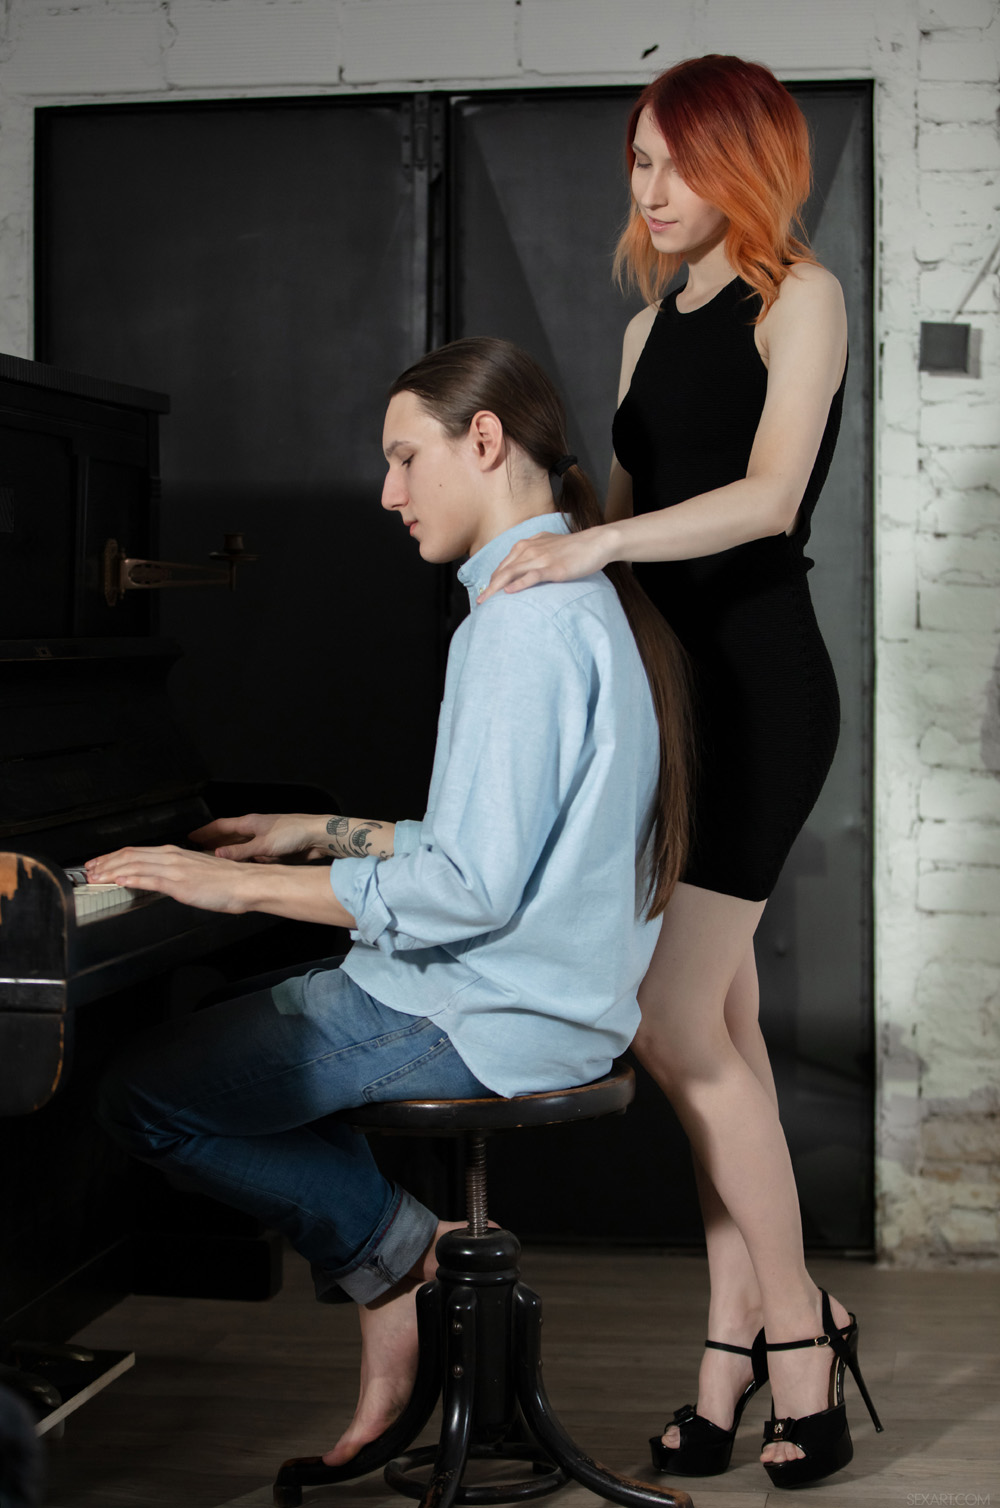 Elin Flame tenderly making love to her favorite piano player